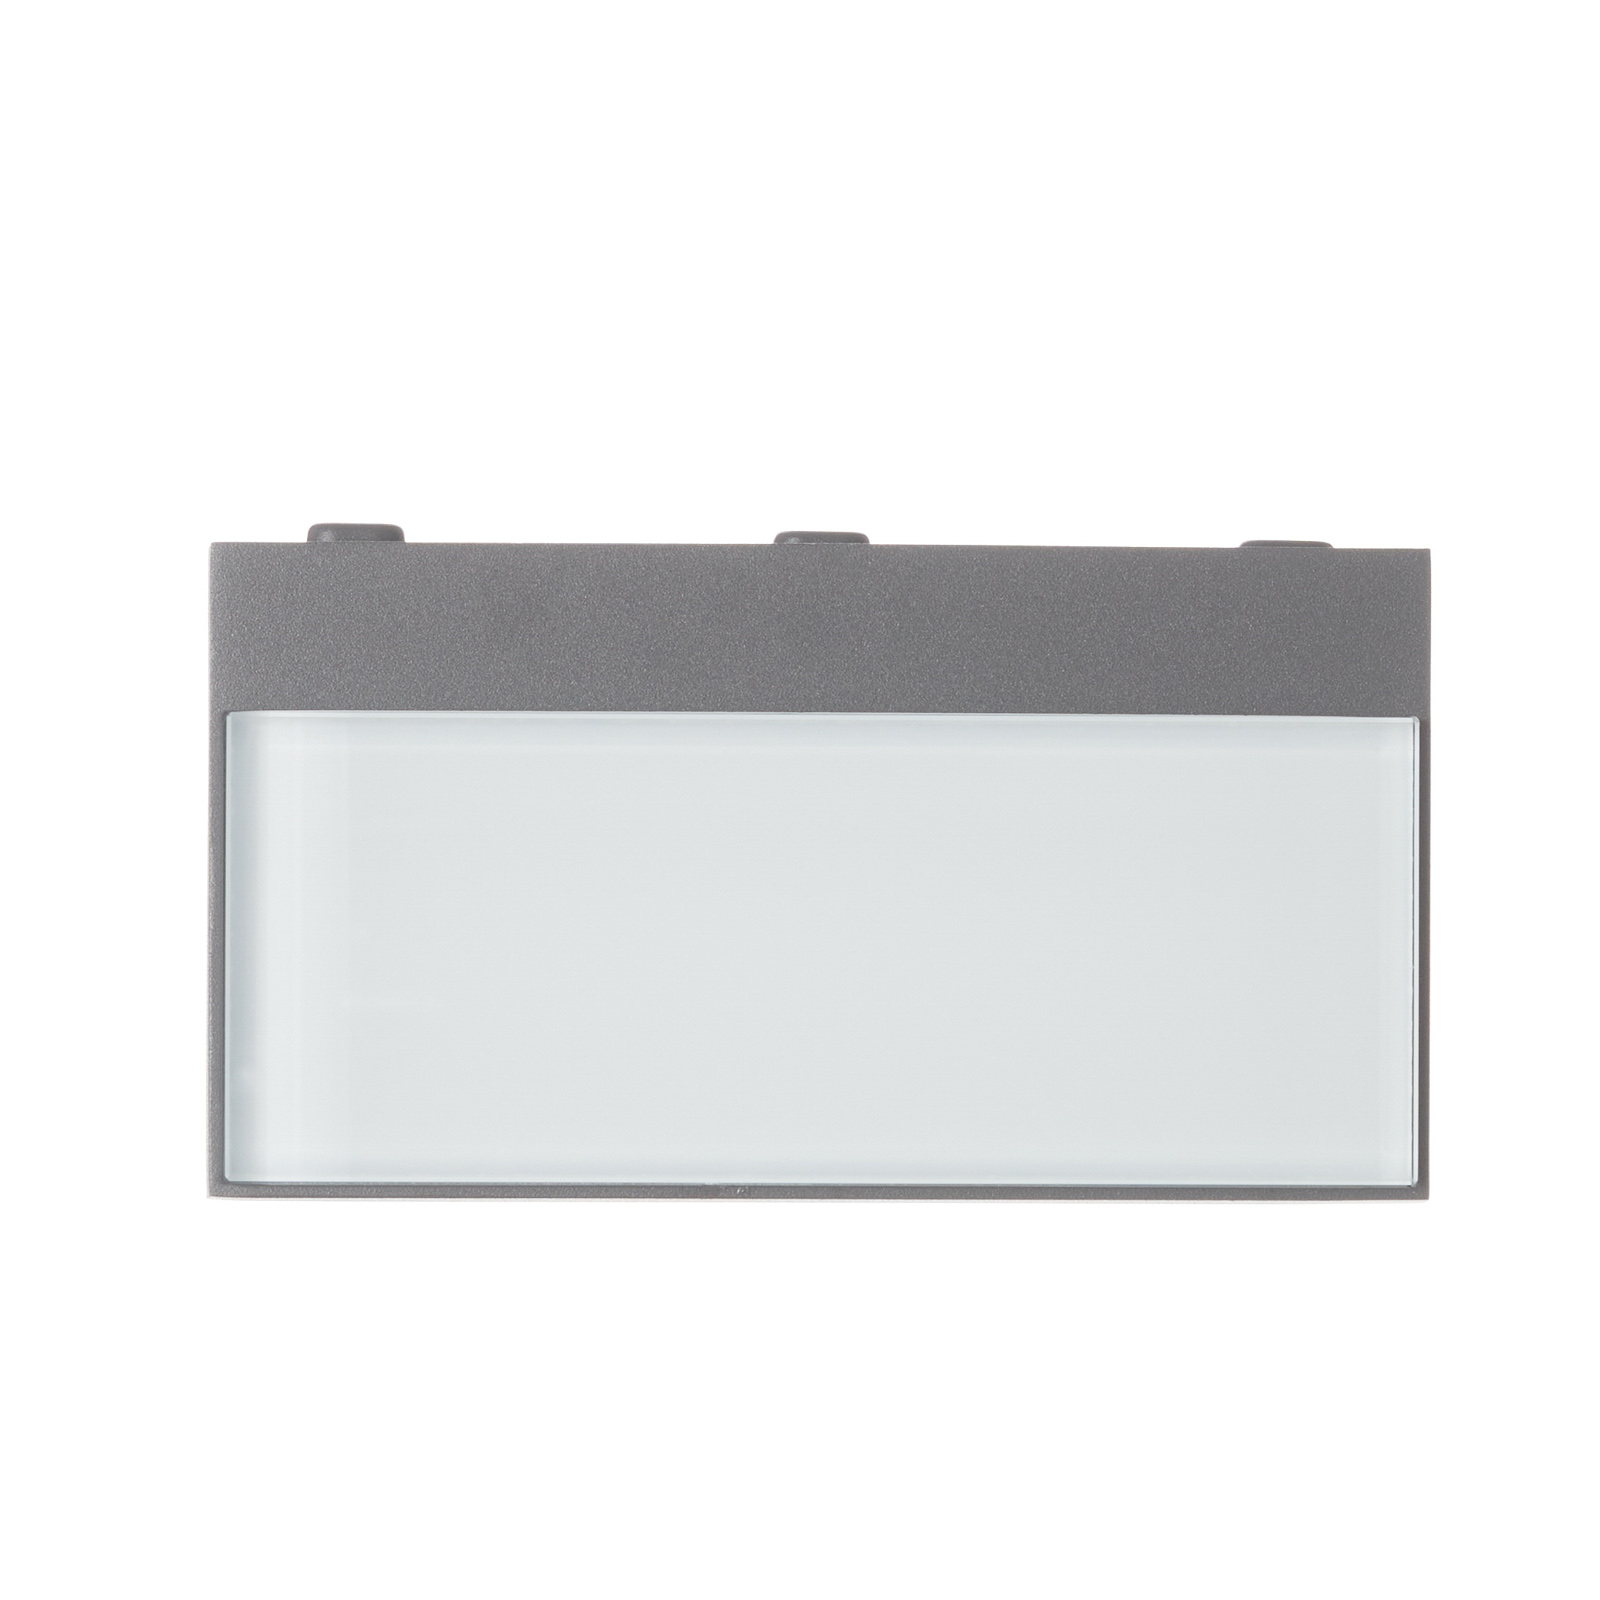 CMD 9027 LED outdoor wall light, up and down